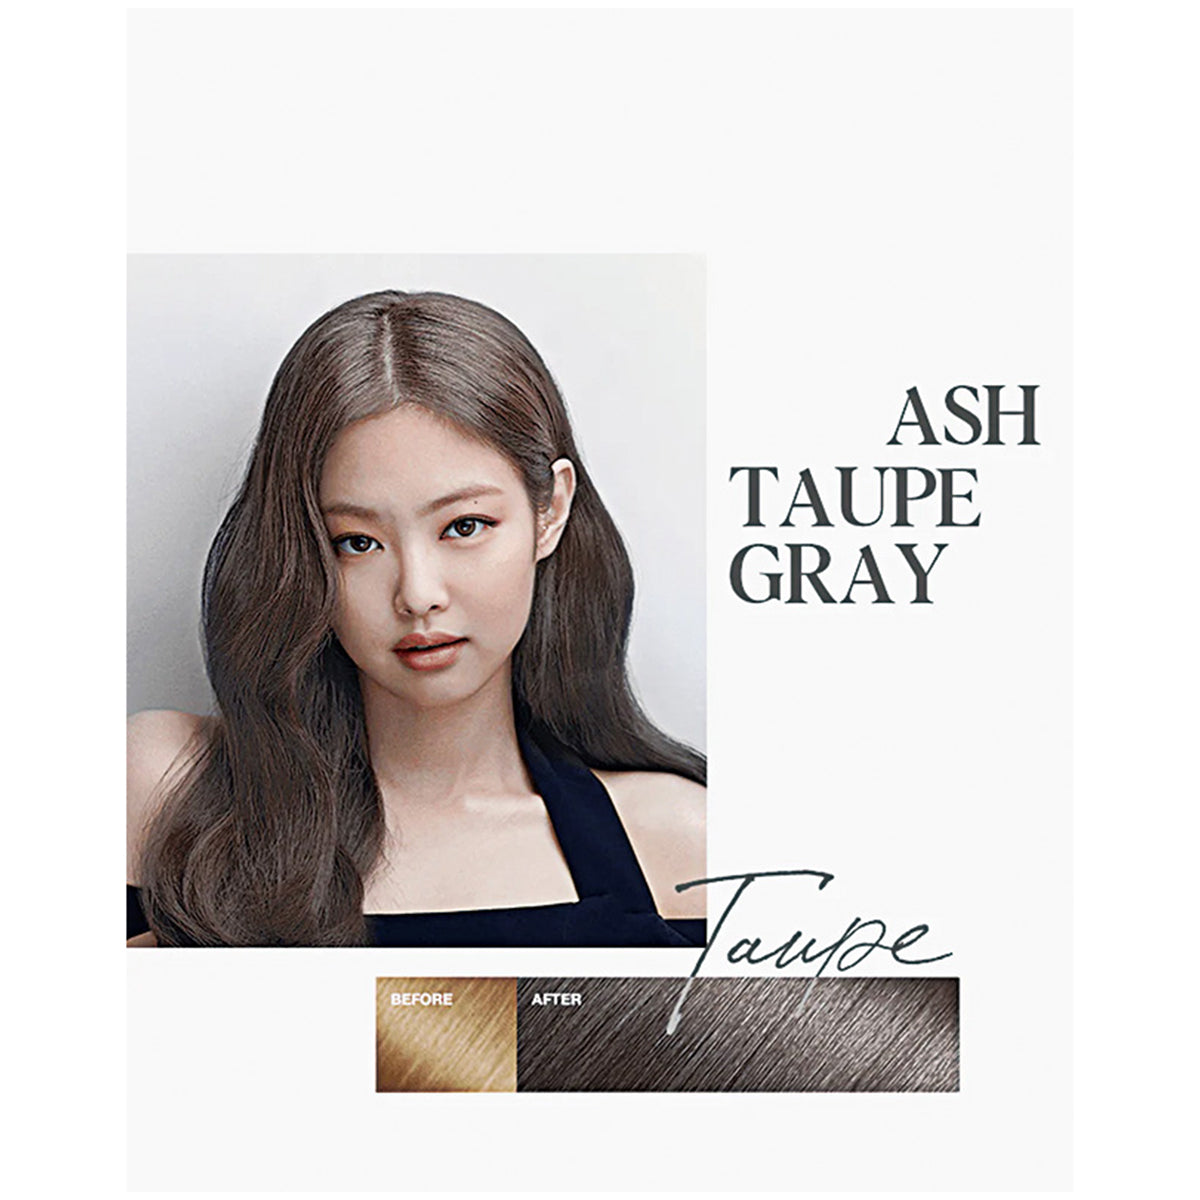 All New Hello Bubble x Blackpink Hair Color Kit #7A Ash Taupe Grey